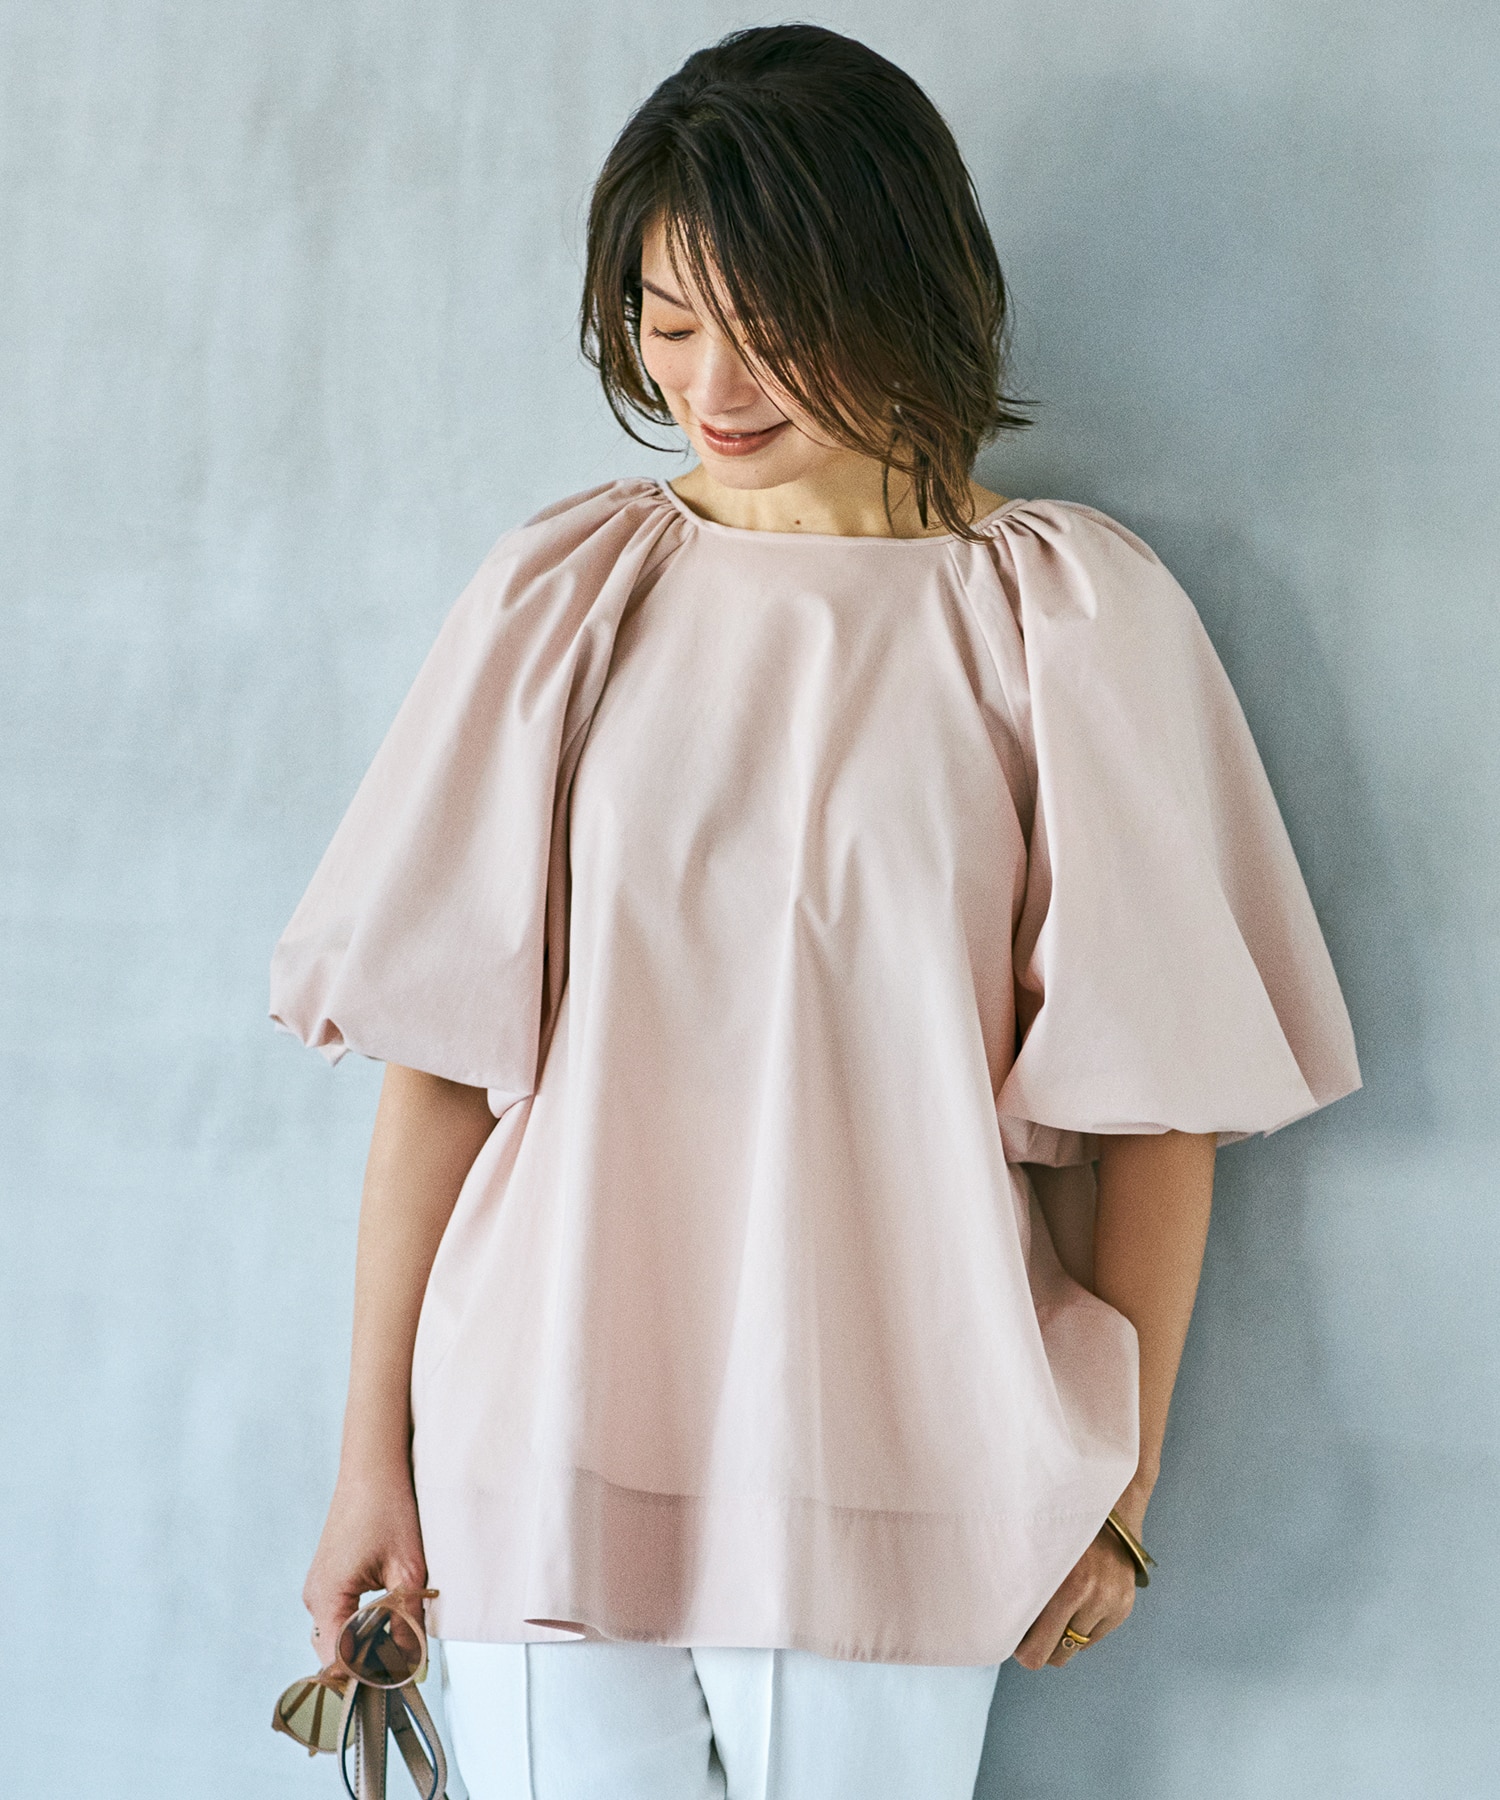 romile BUTTERFLY BLOUSE バルーンスリーブブラウス